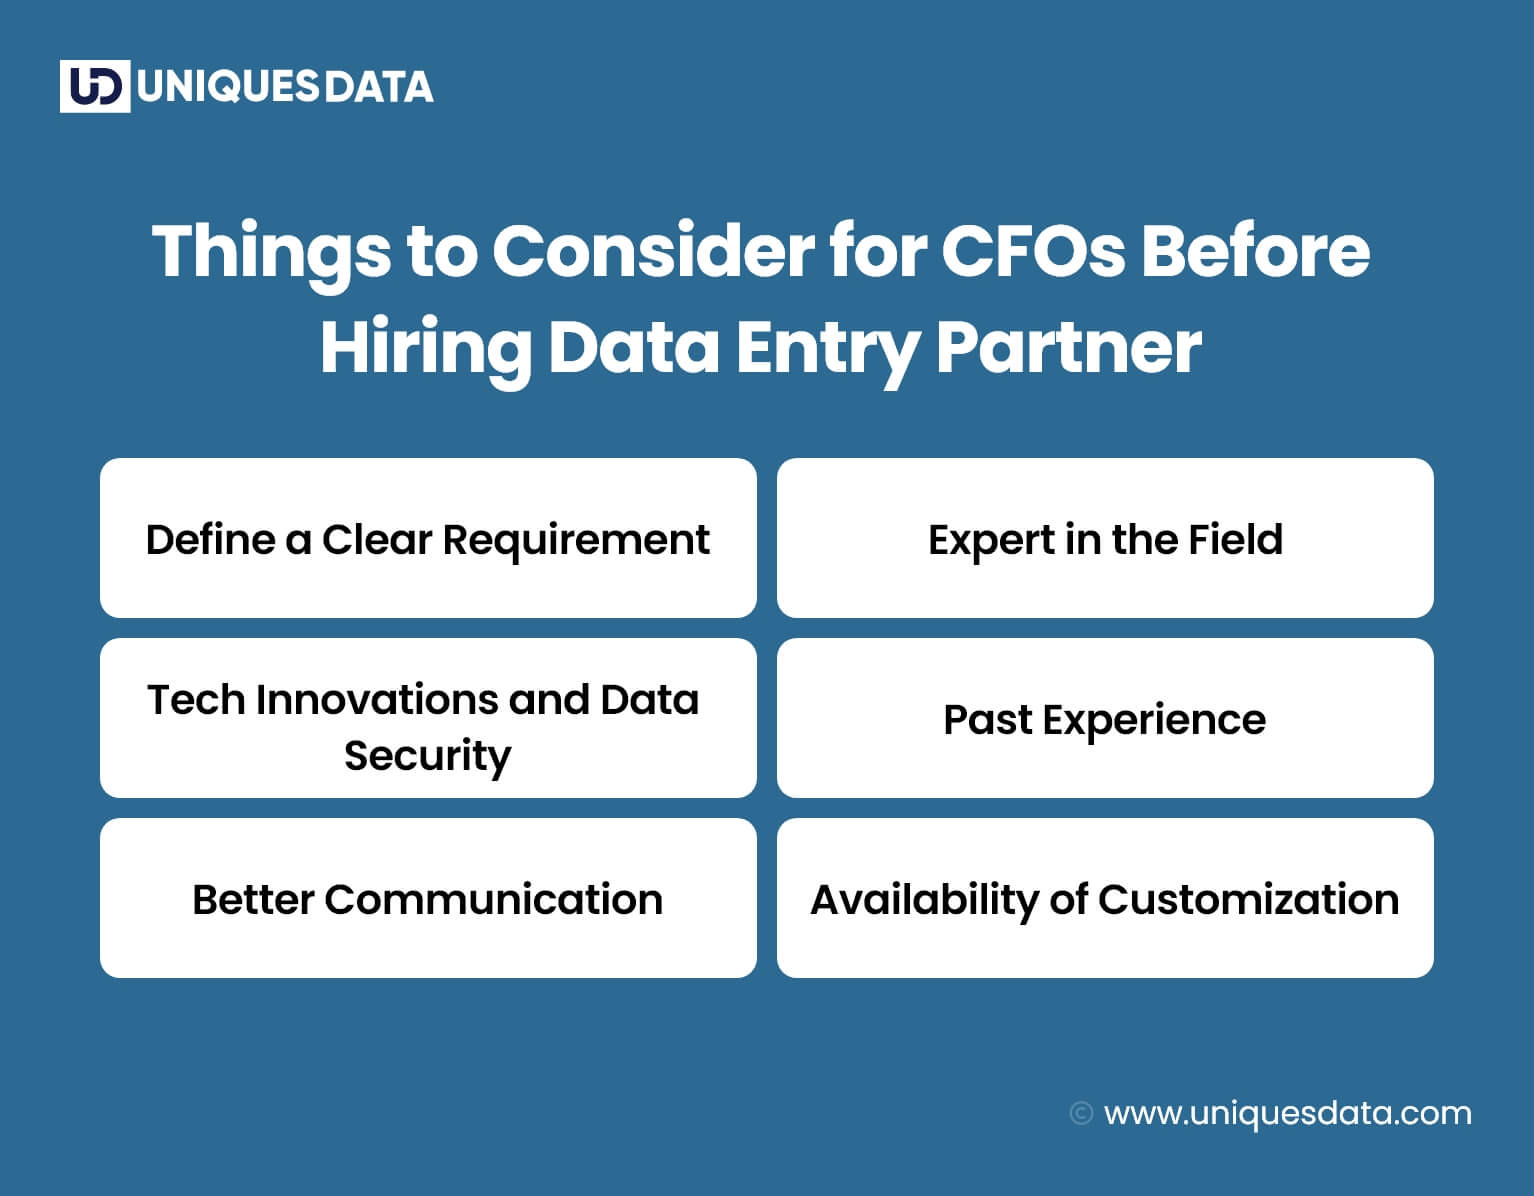 Things to Consider for CFOs Before Hiring Data Entry Partner